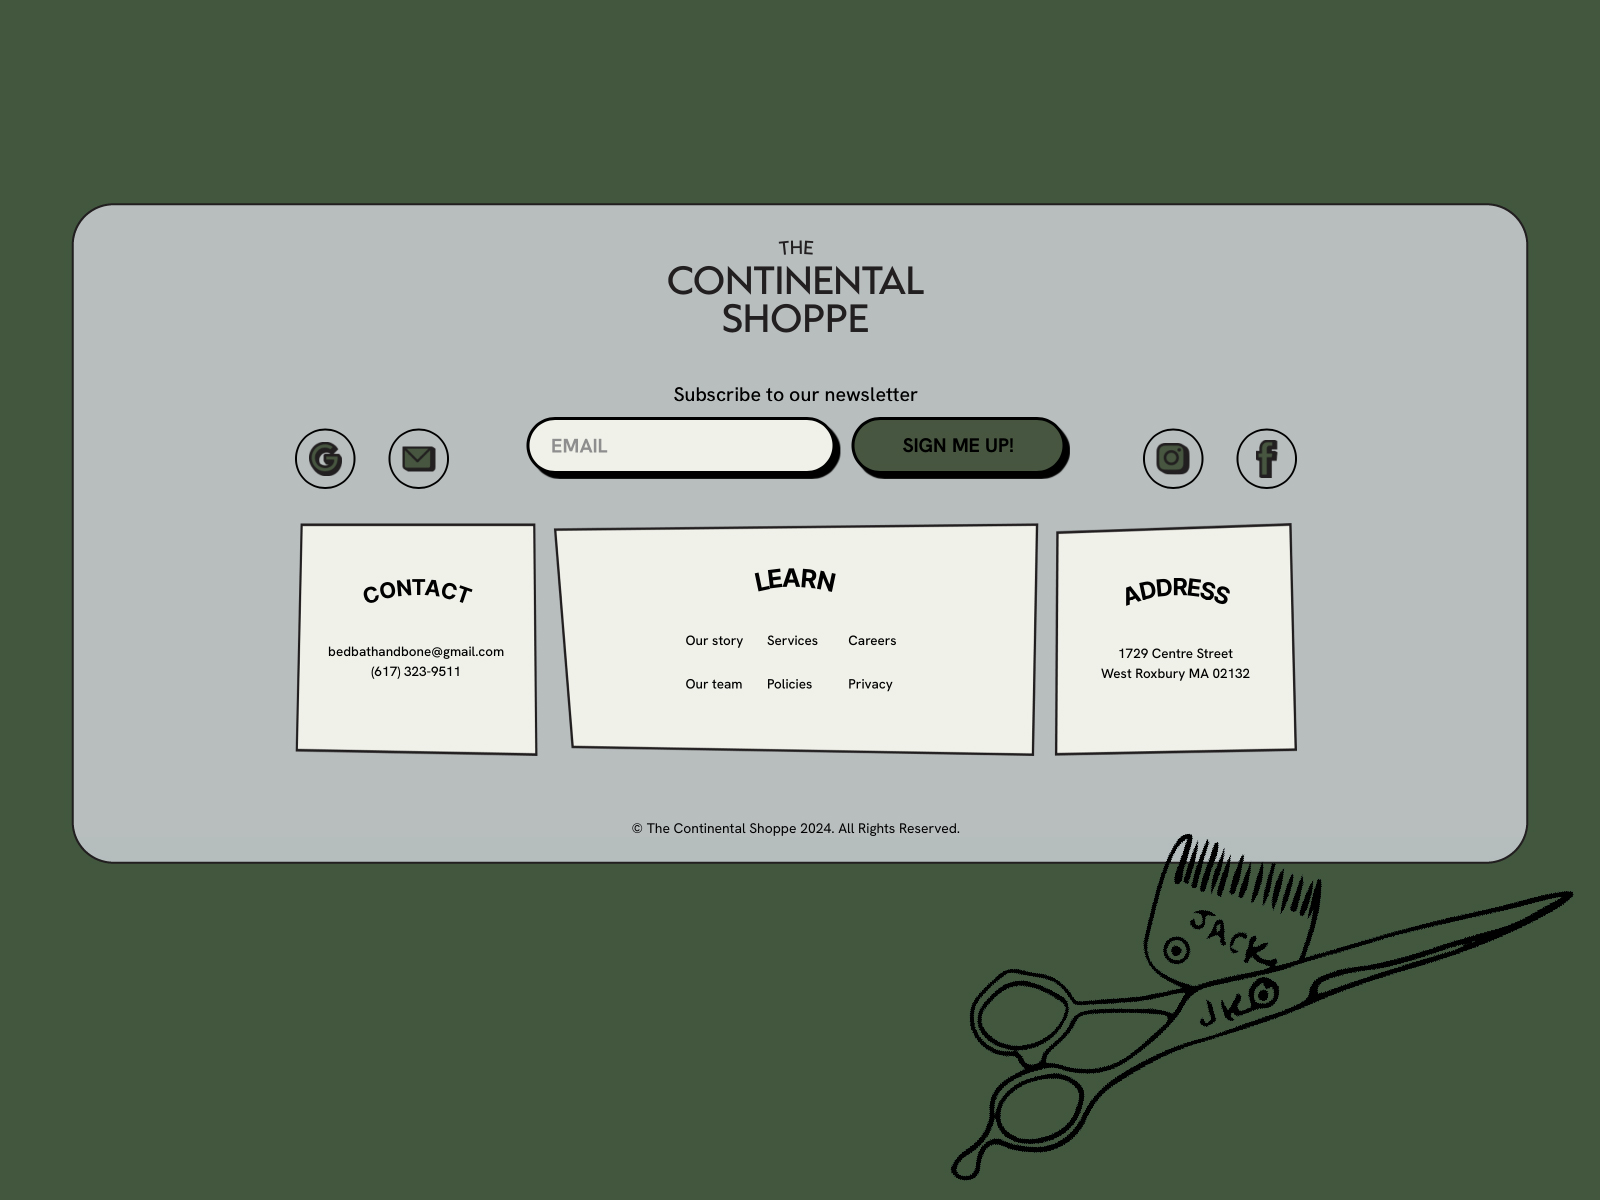 The Continental Shoppe Footer